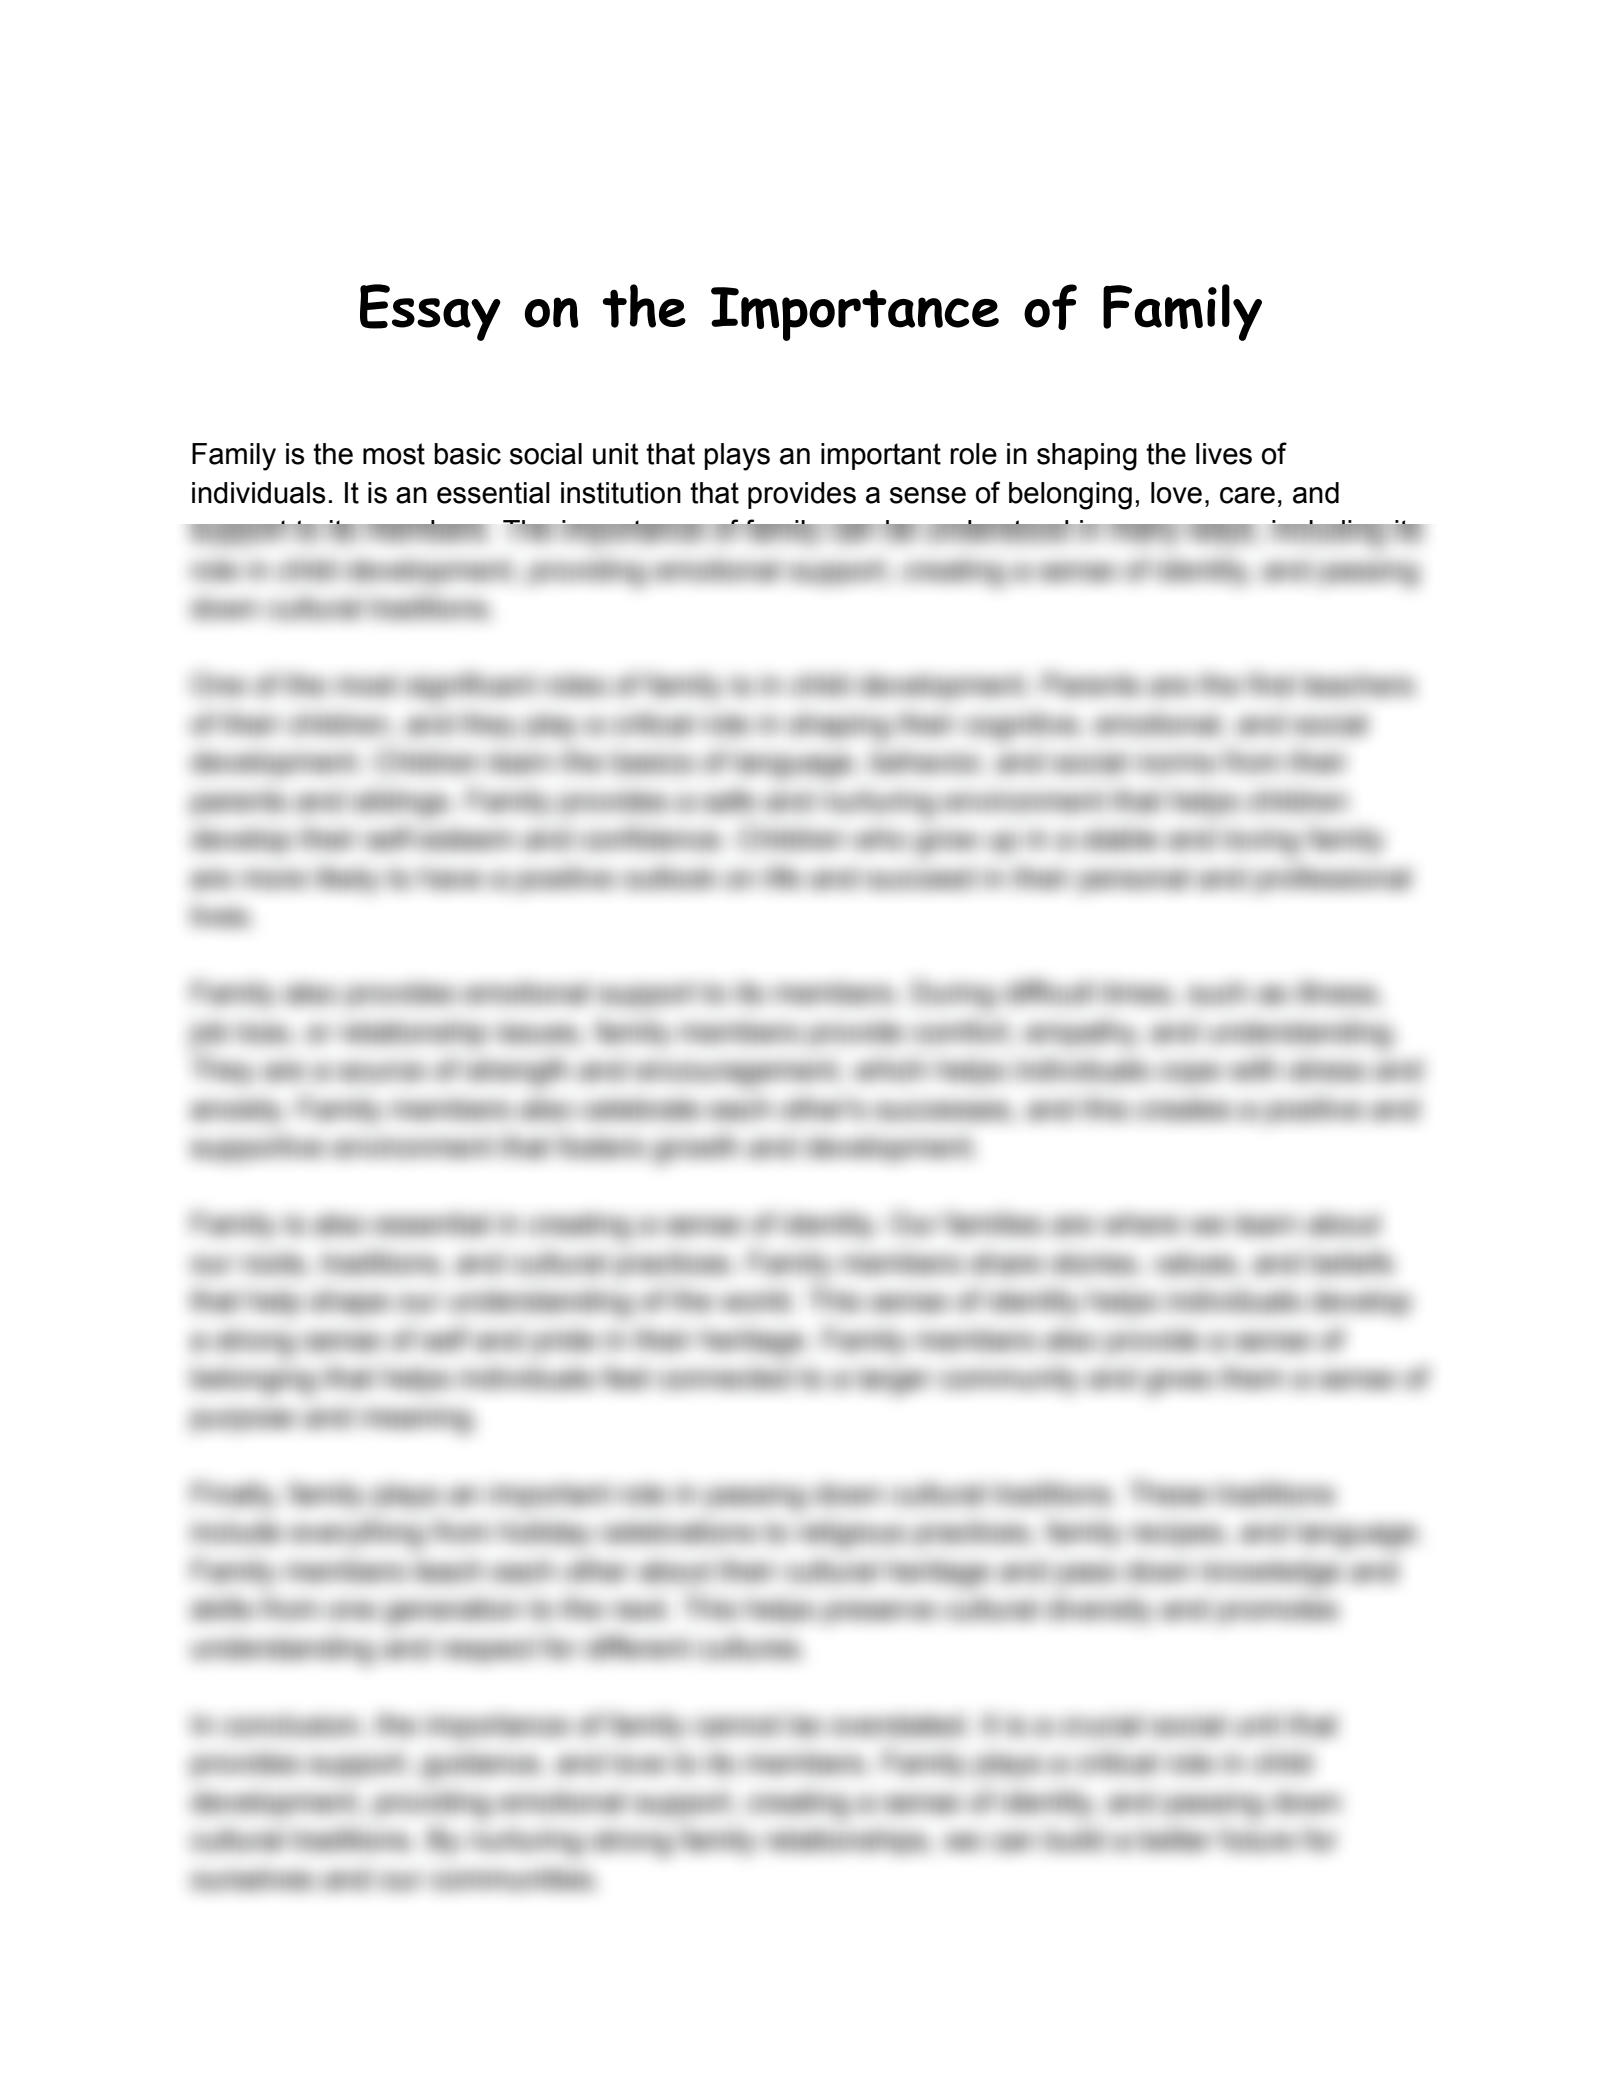 Some potential topics for the essay on the importance of family could include:

1. The role of family in providing emotional support and a sense of belonging.
2. The impact of family on individual identity and personal development.
3. The importance of family in shaping values, beliefs, and cultural heritage.
4. The role of family in promoting mental and physical well-being.
5. The significance of family in fostering healthy relationships and social connections.
6. The role of family in providin